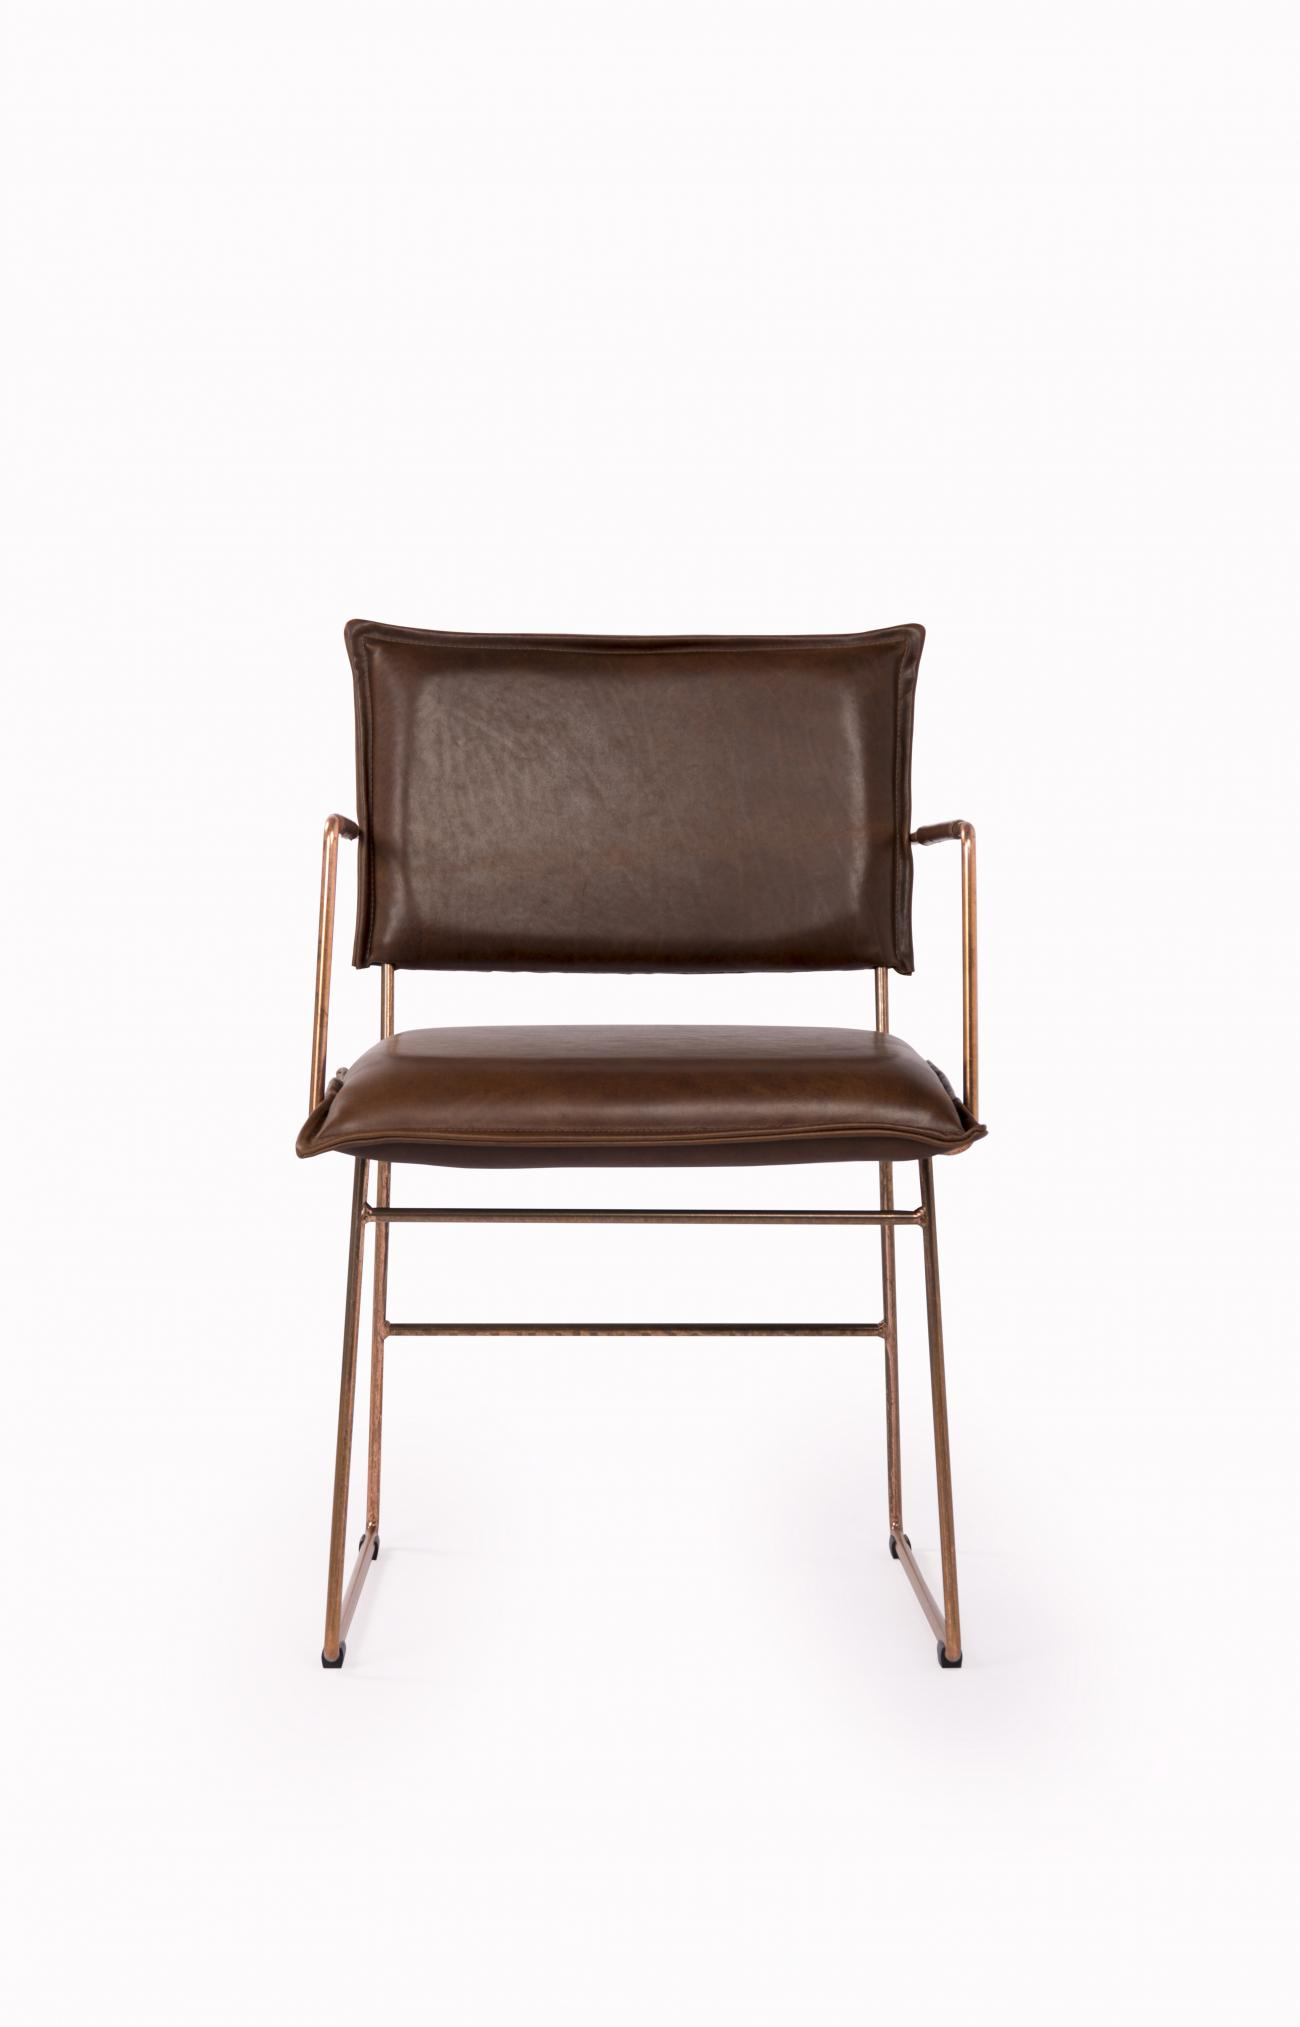 https://www.fundesign.nl/media/catalog/product/n/o/norman_diningchair_without_arm_copper_frame_luxor_fango_front_3_.jpg